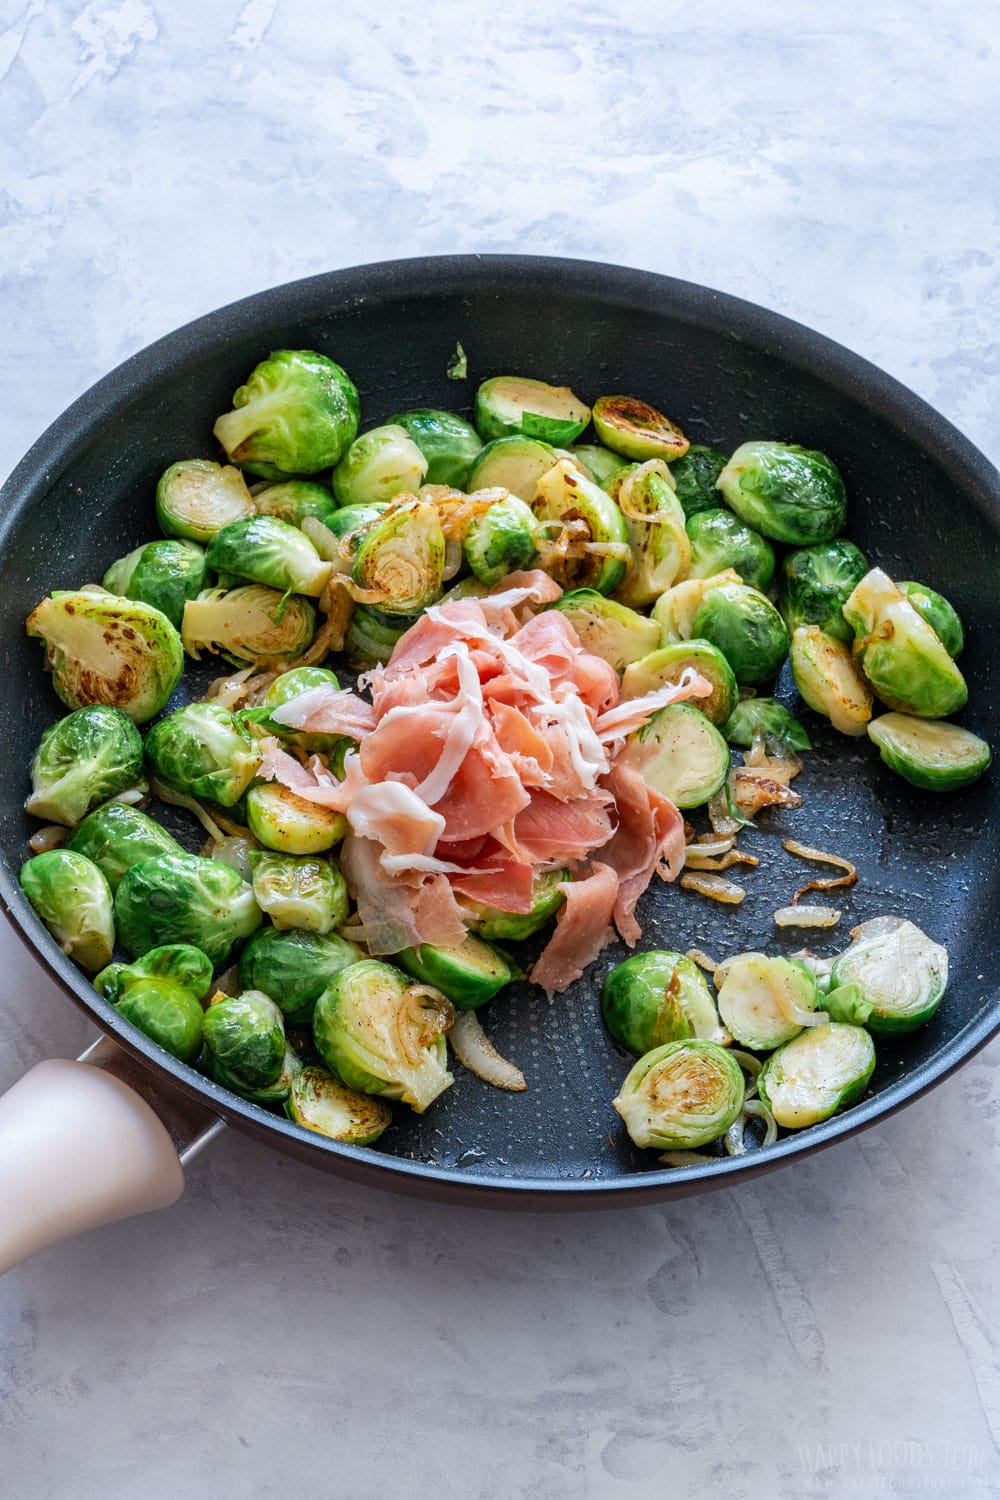 Skillet with Brussels sprouts and prosciutto.